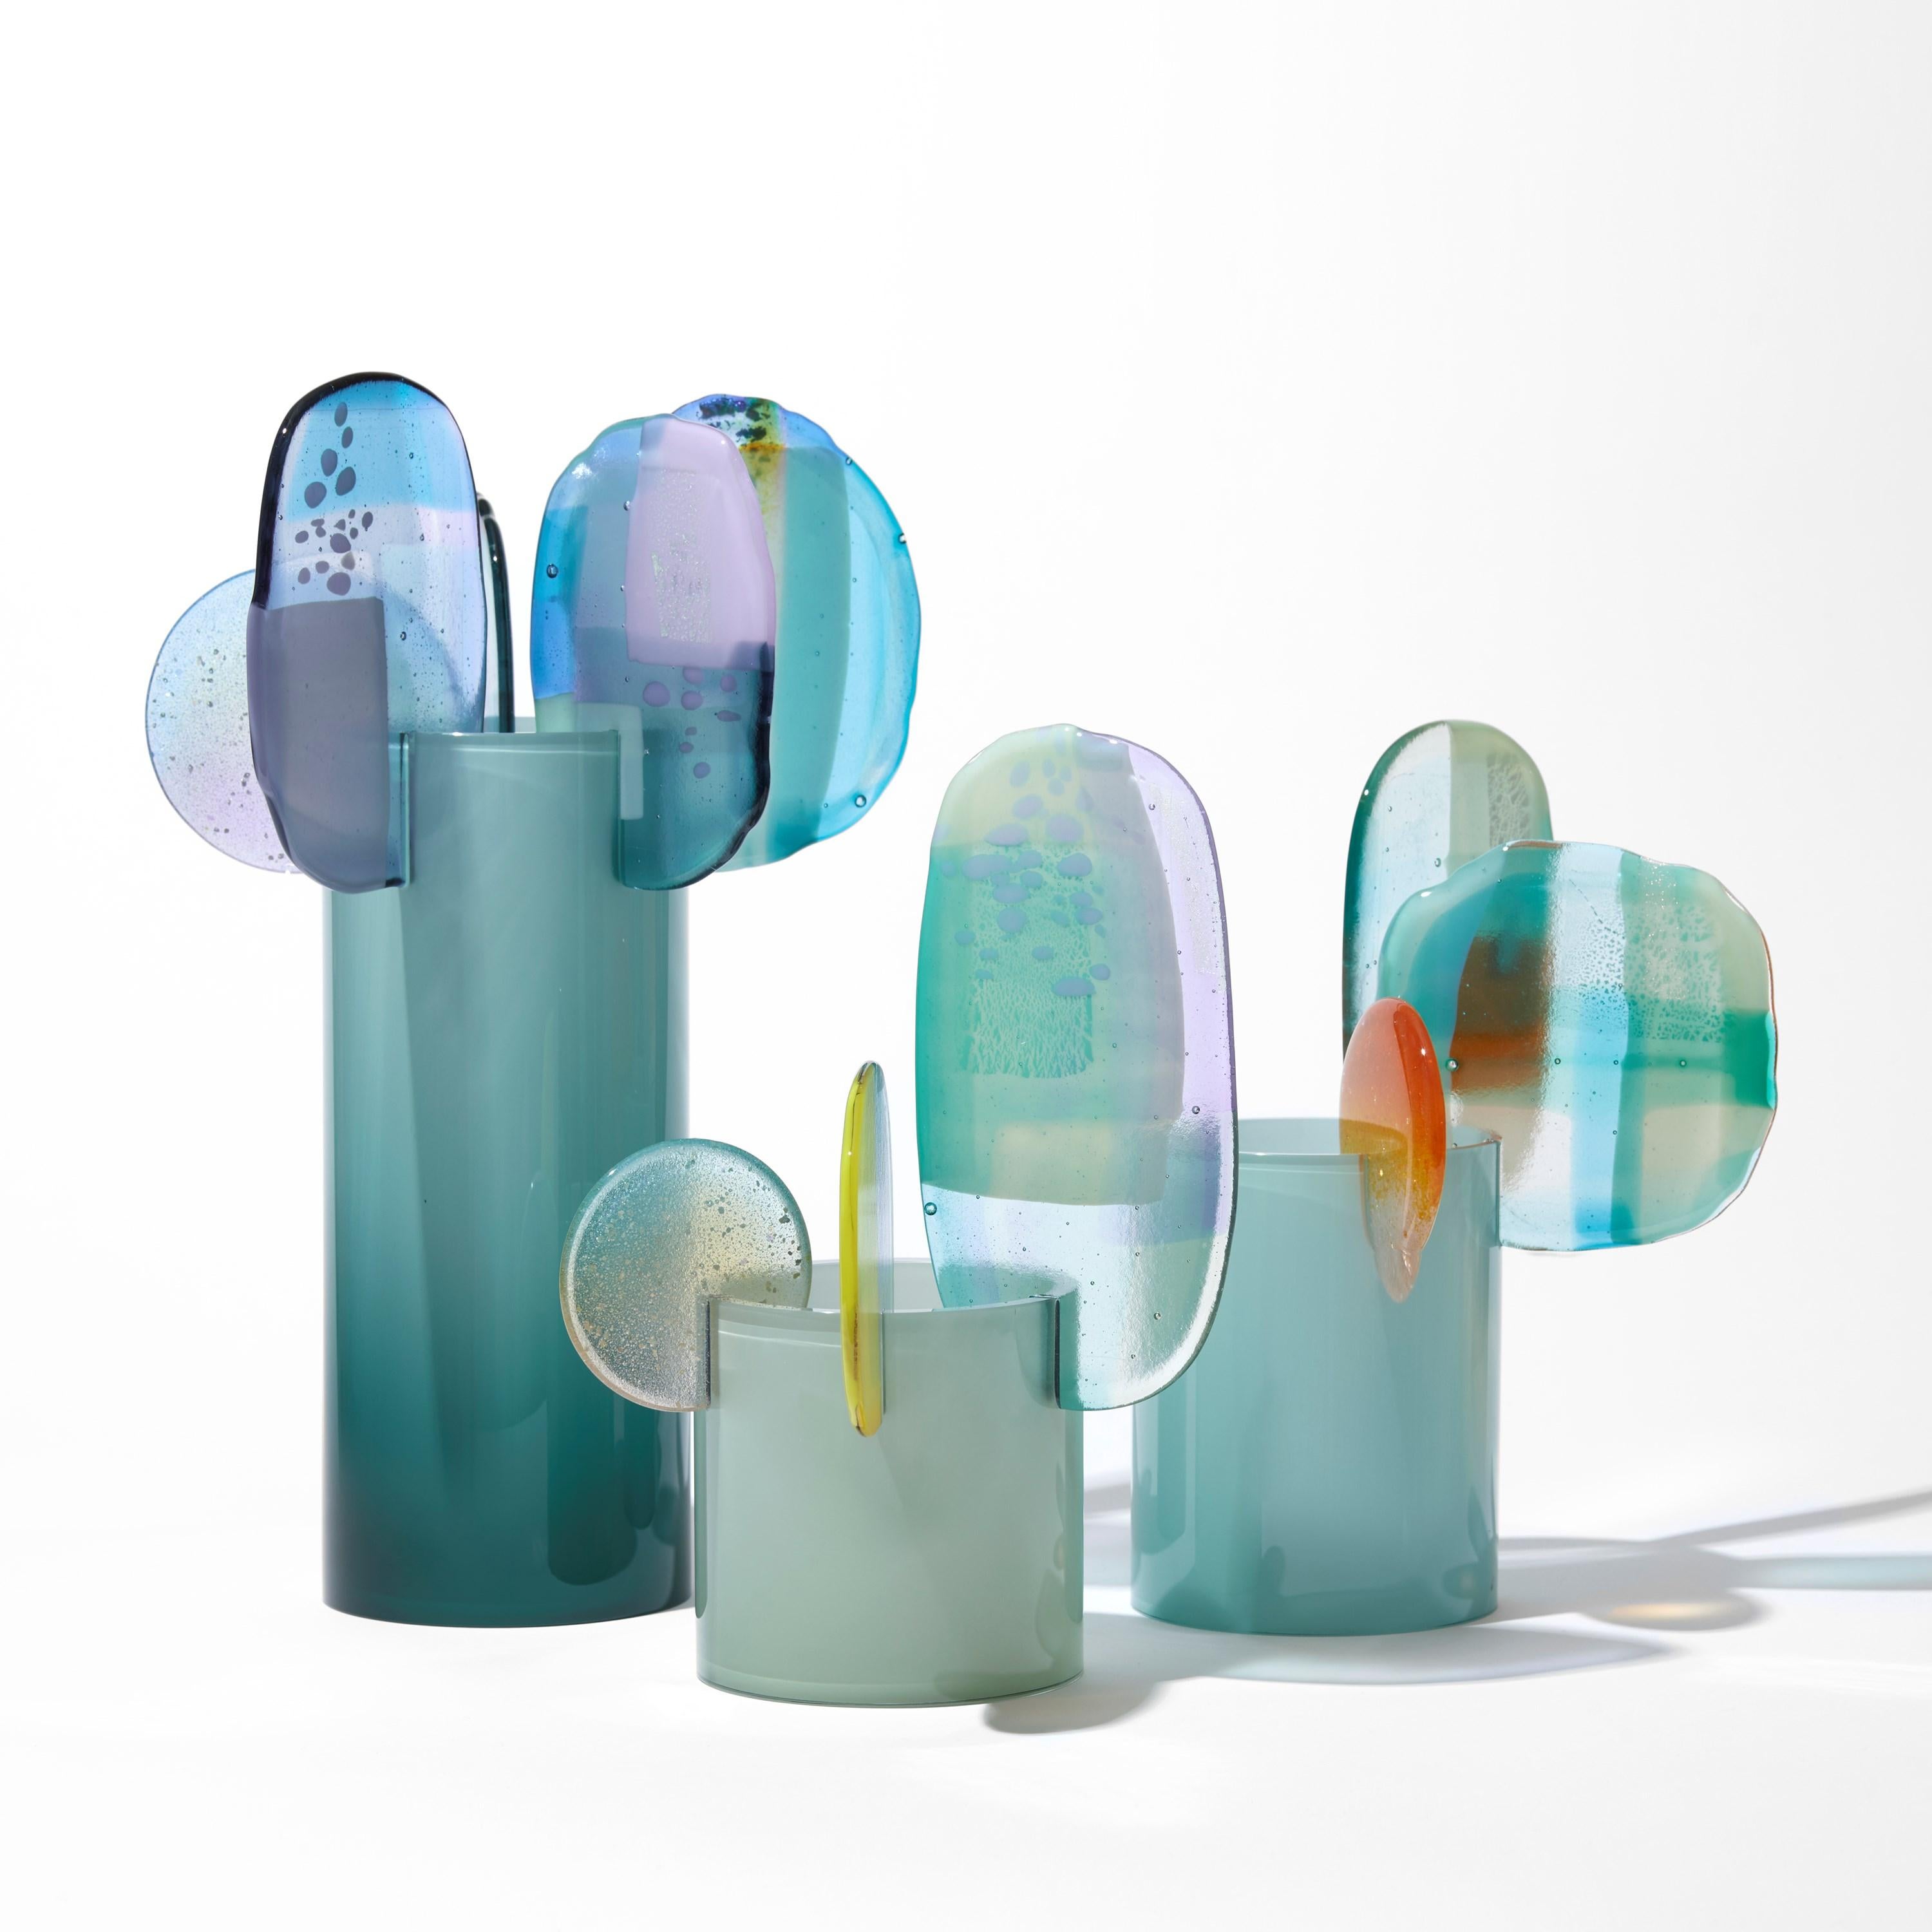 Cut Glass Paradise 08 in Celadon, a jade, yellow & lilac glass sculpture by Amy Cushing For Sale